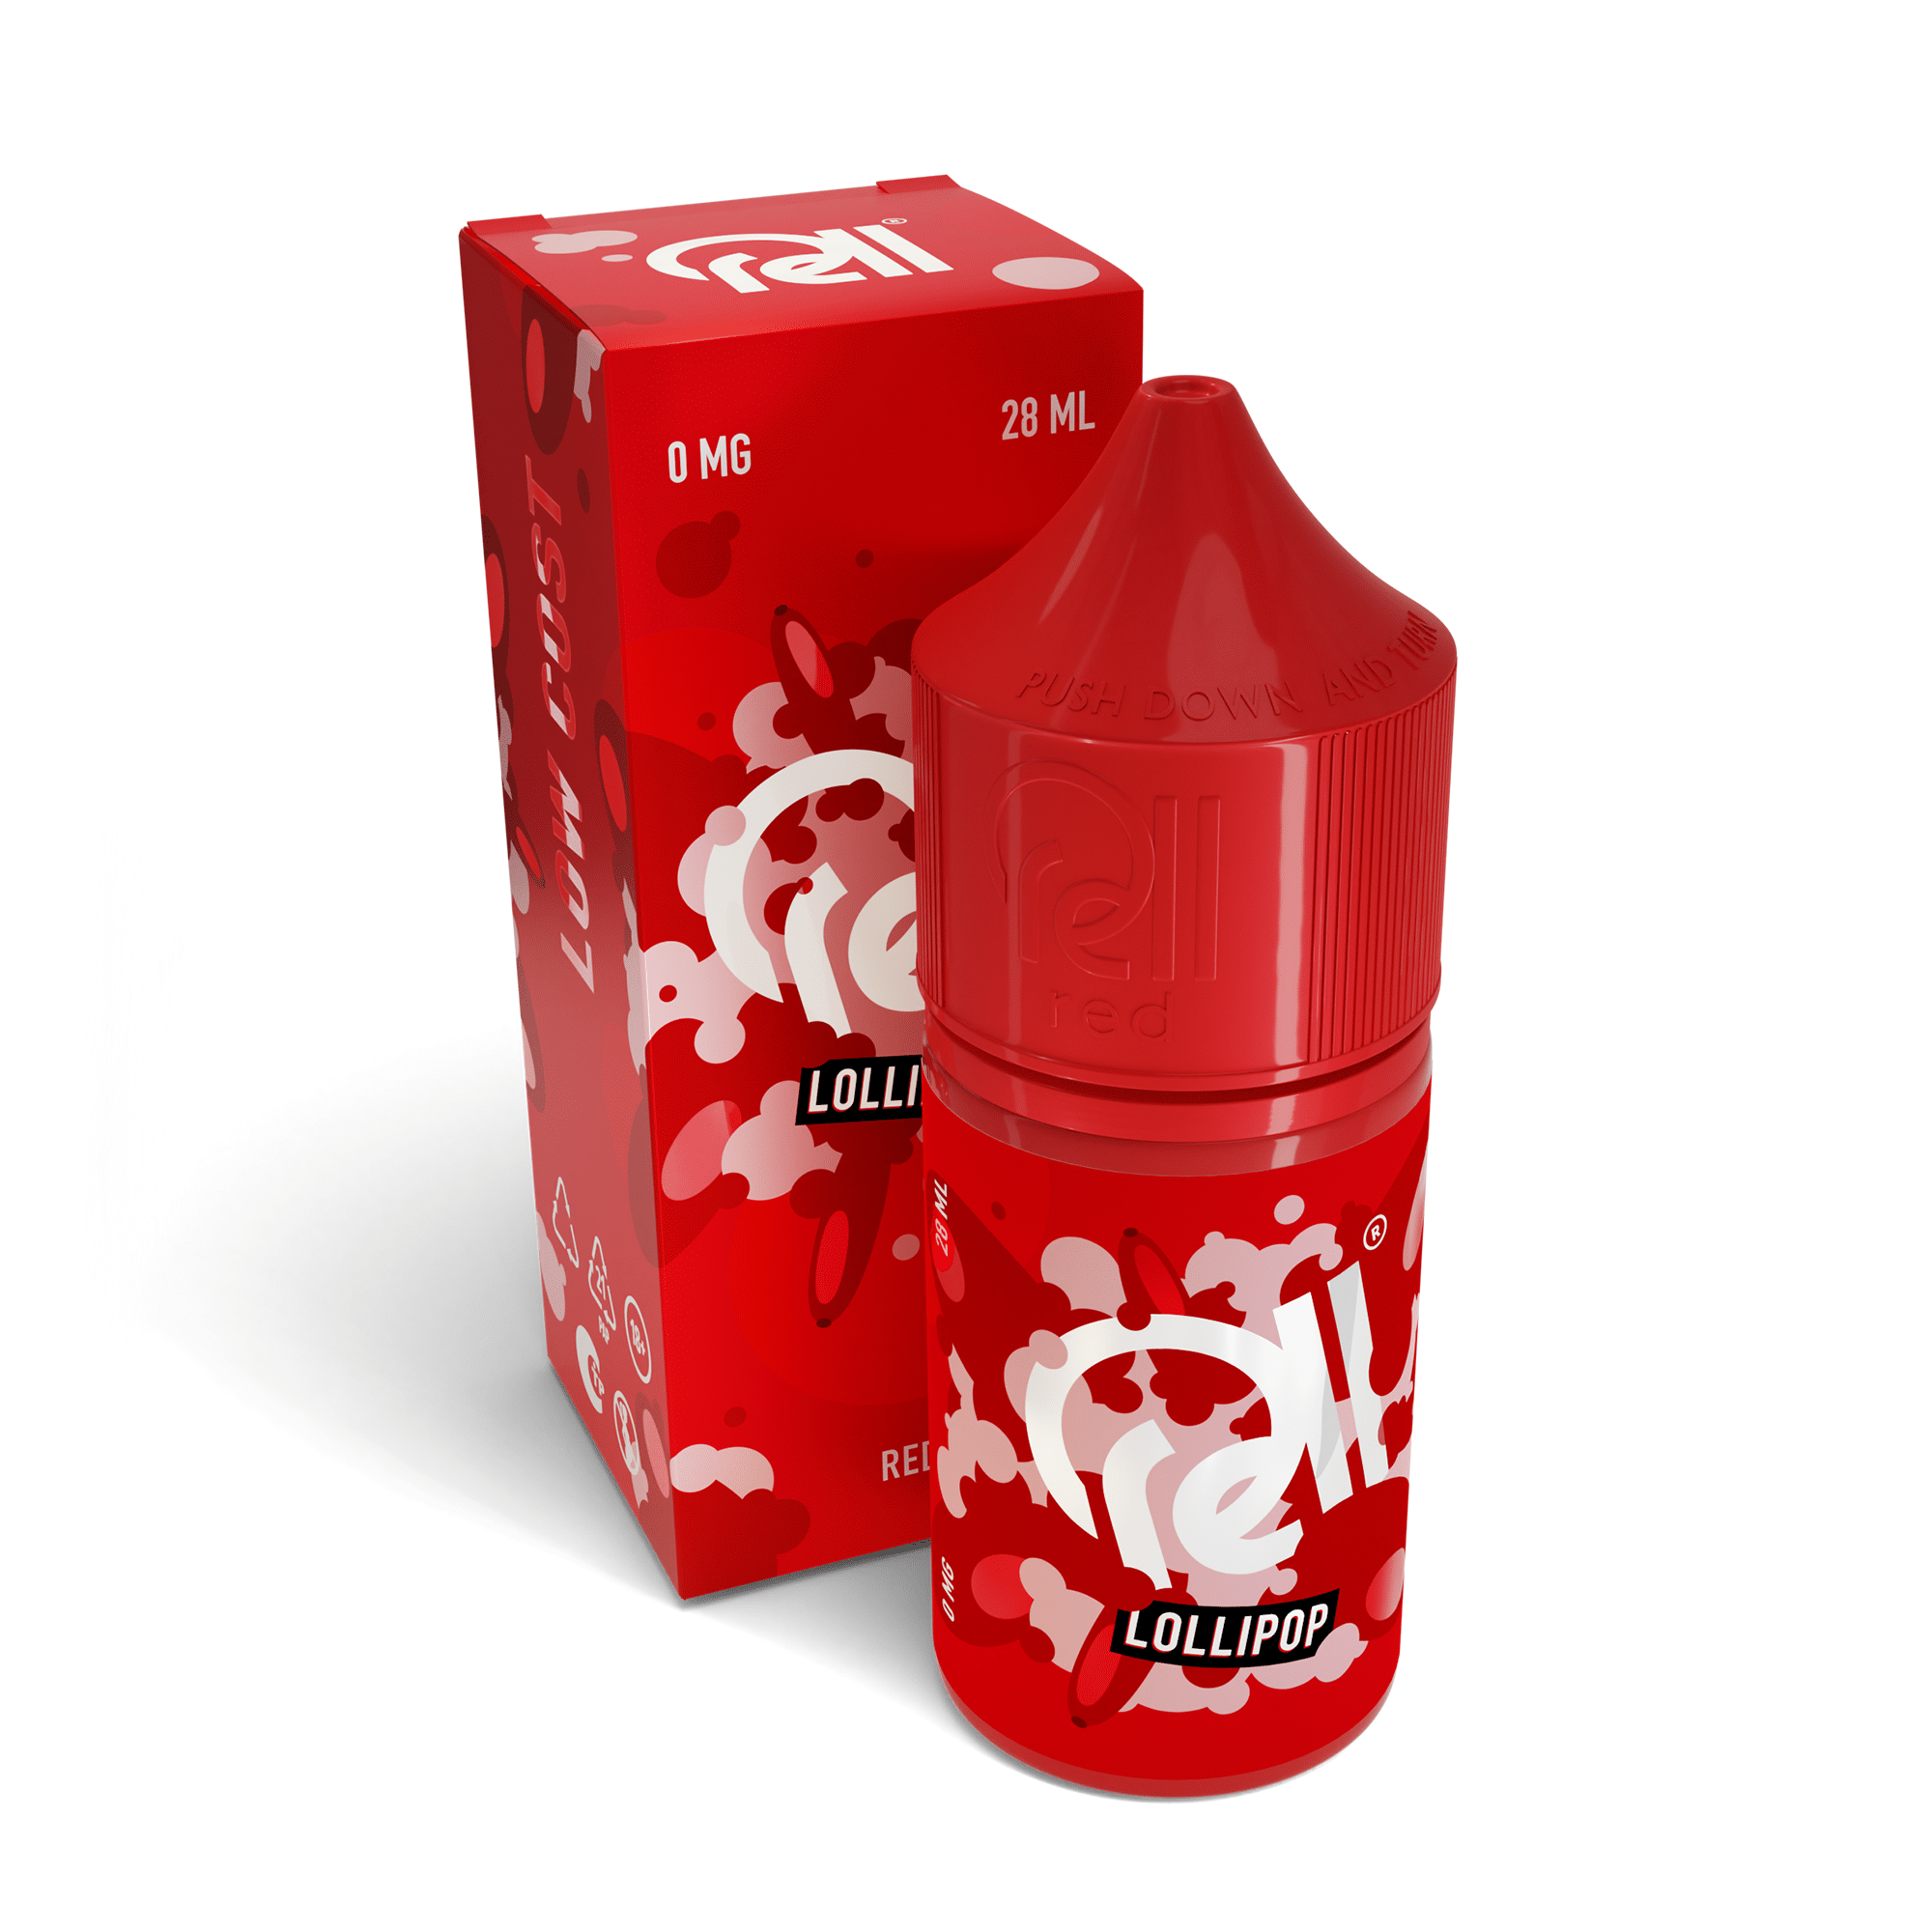 Rell red. Rell Red жидкость. Жидкость Rell Red Salt 30мл. Rell жидкость вишня. Жидкости Rell Low cost вкусы.